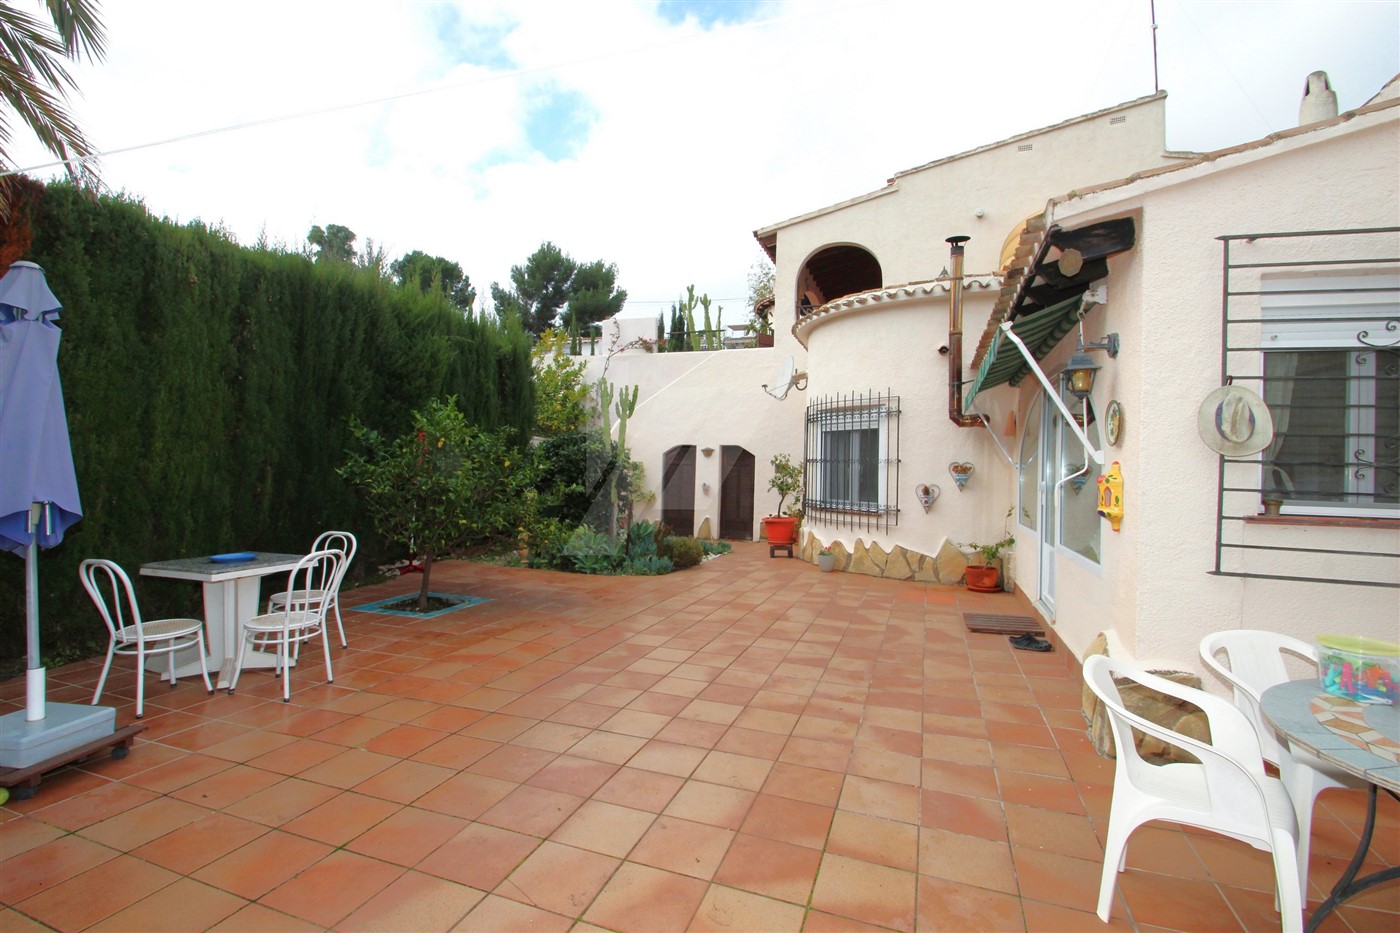 Villa for sale in Moraira on a double plot, close to town.